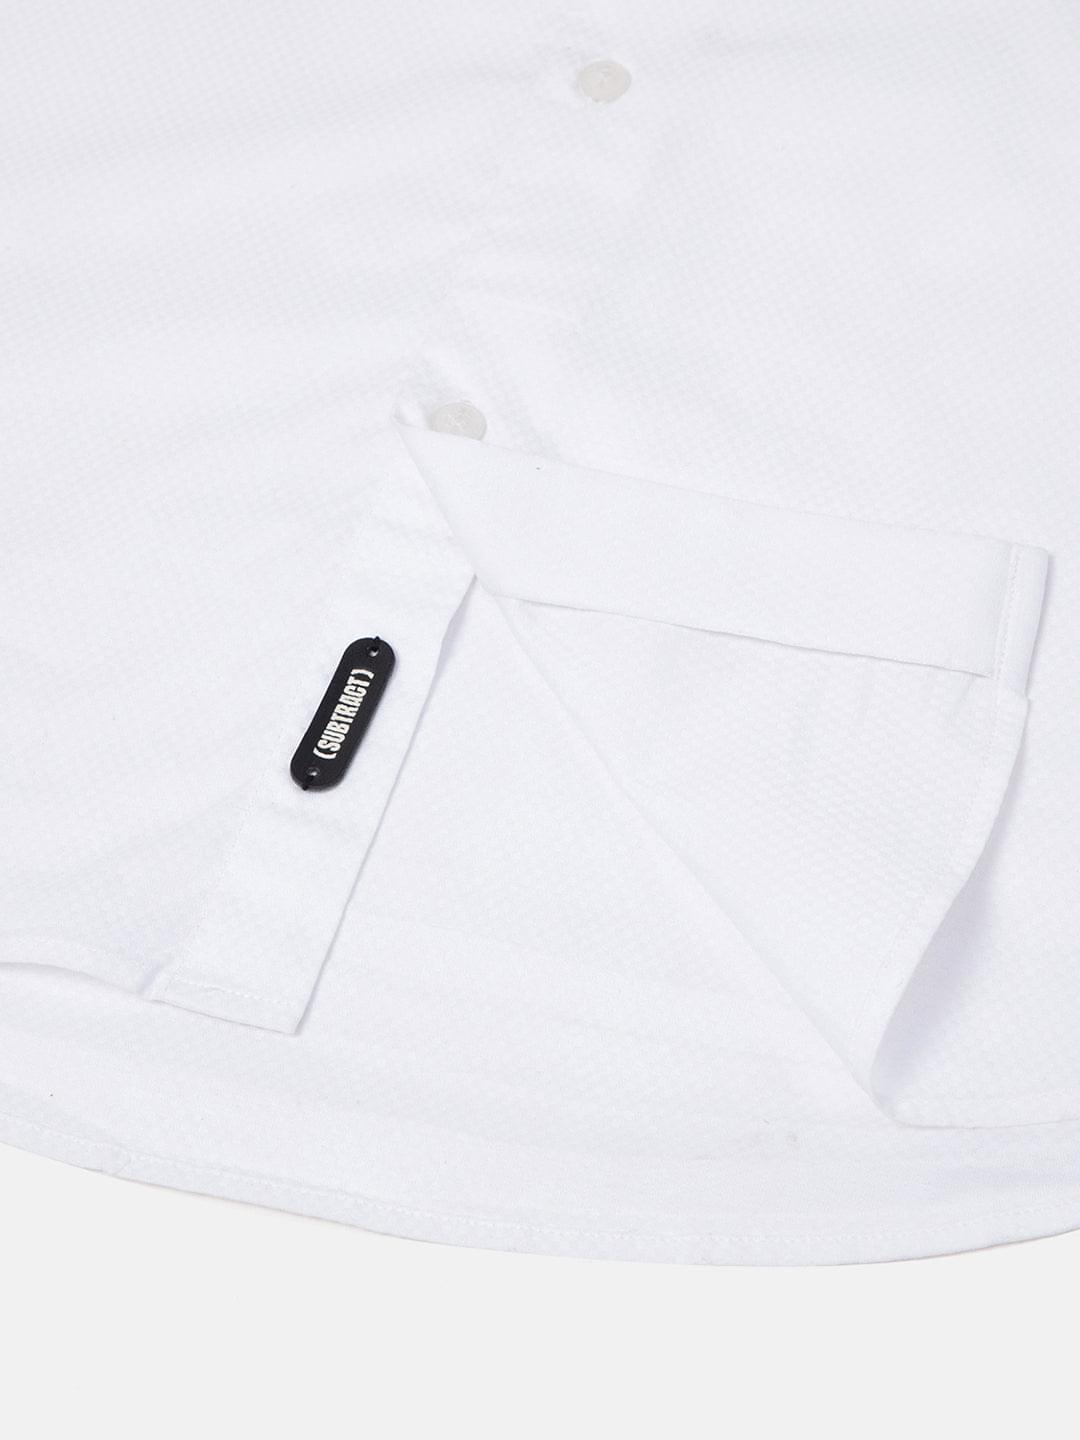 Dobby Evening Shirt in White with Stretch - Slim Fit